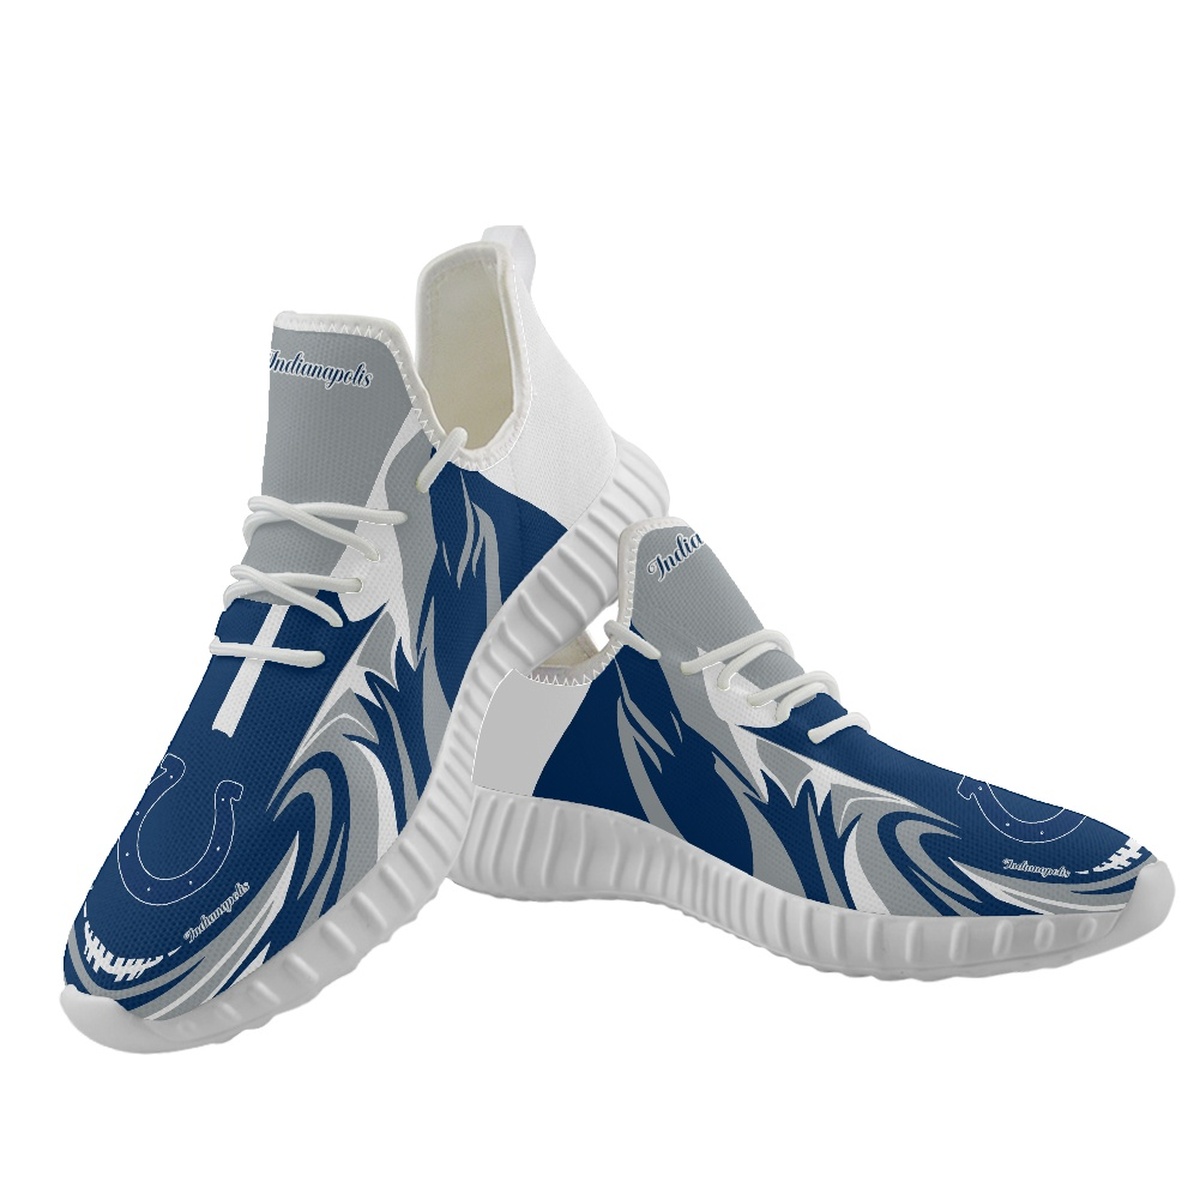 Women's Indianapolis Colts Mesh Knit Sneakers/Shoes 012